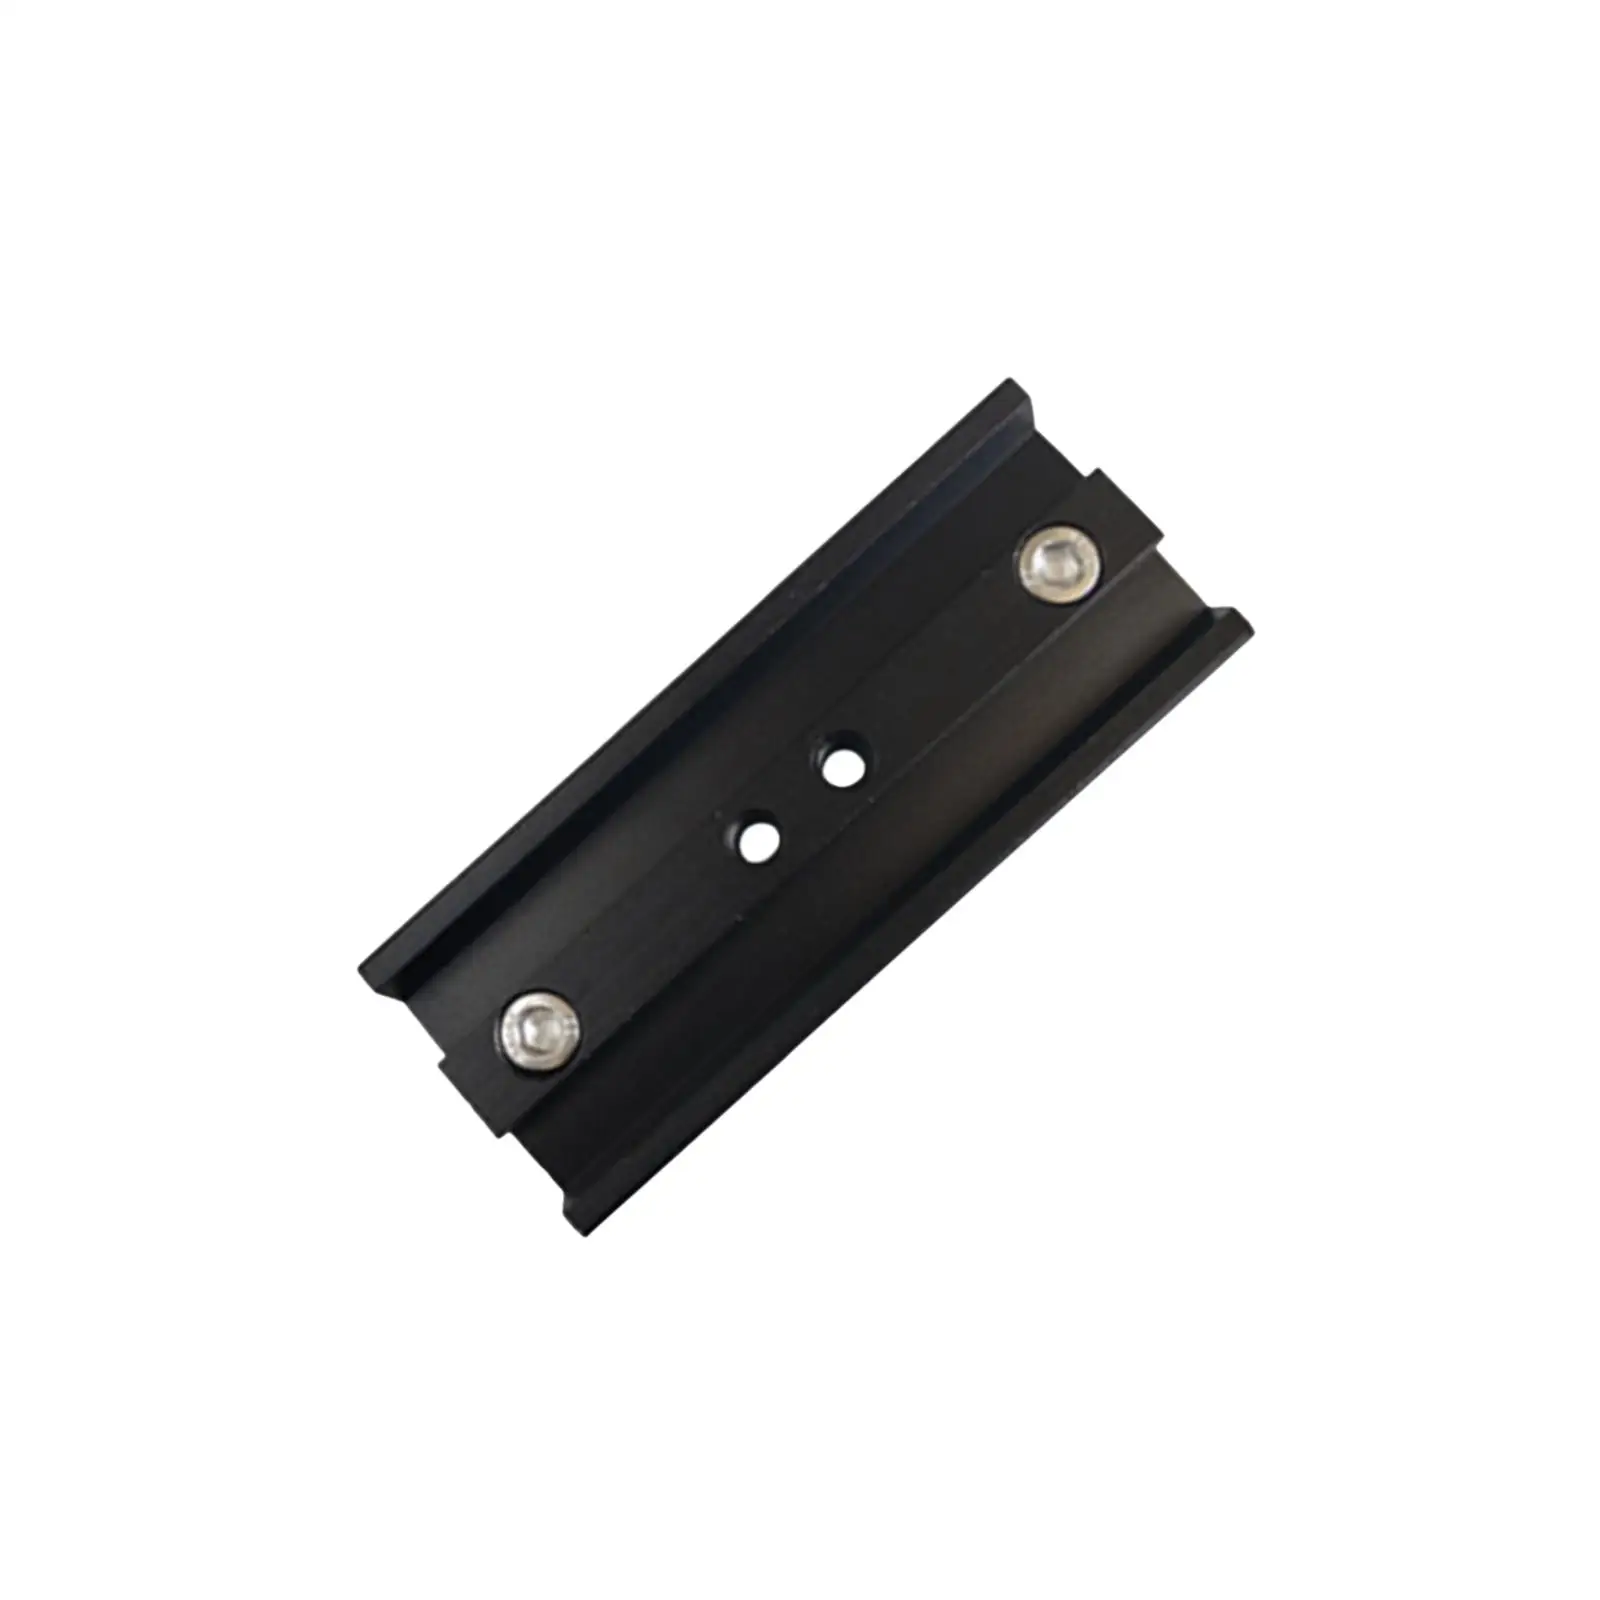 Mounting Plate for Telescope Equatorial Tripod 4.25inch Accessory